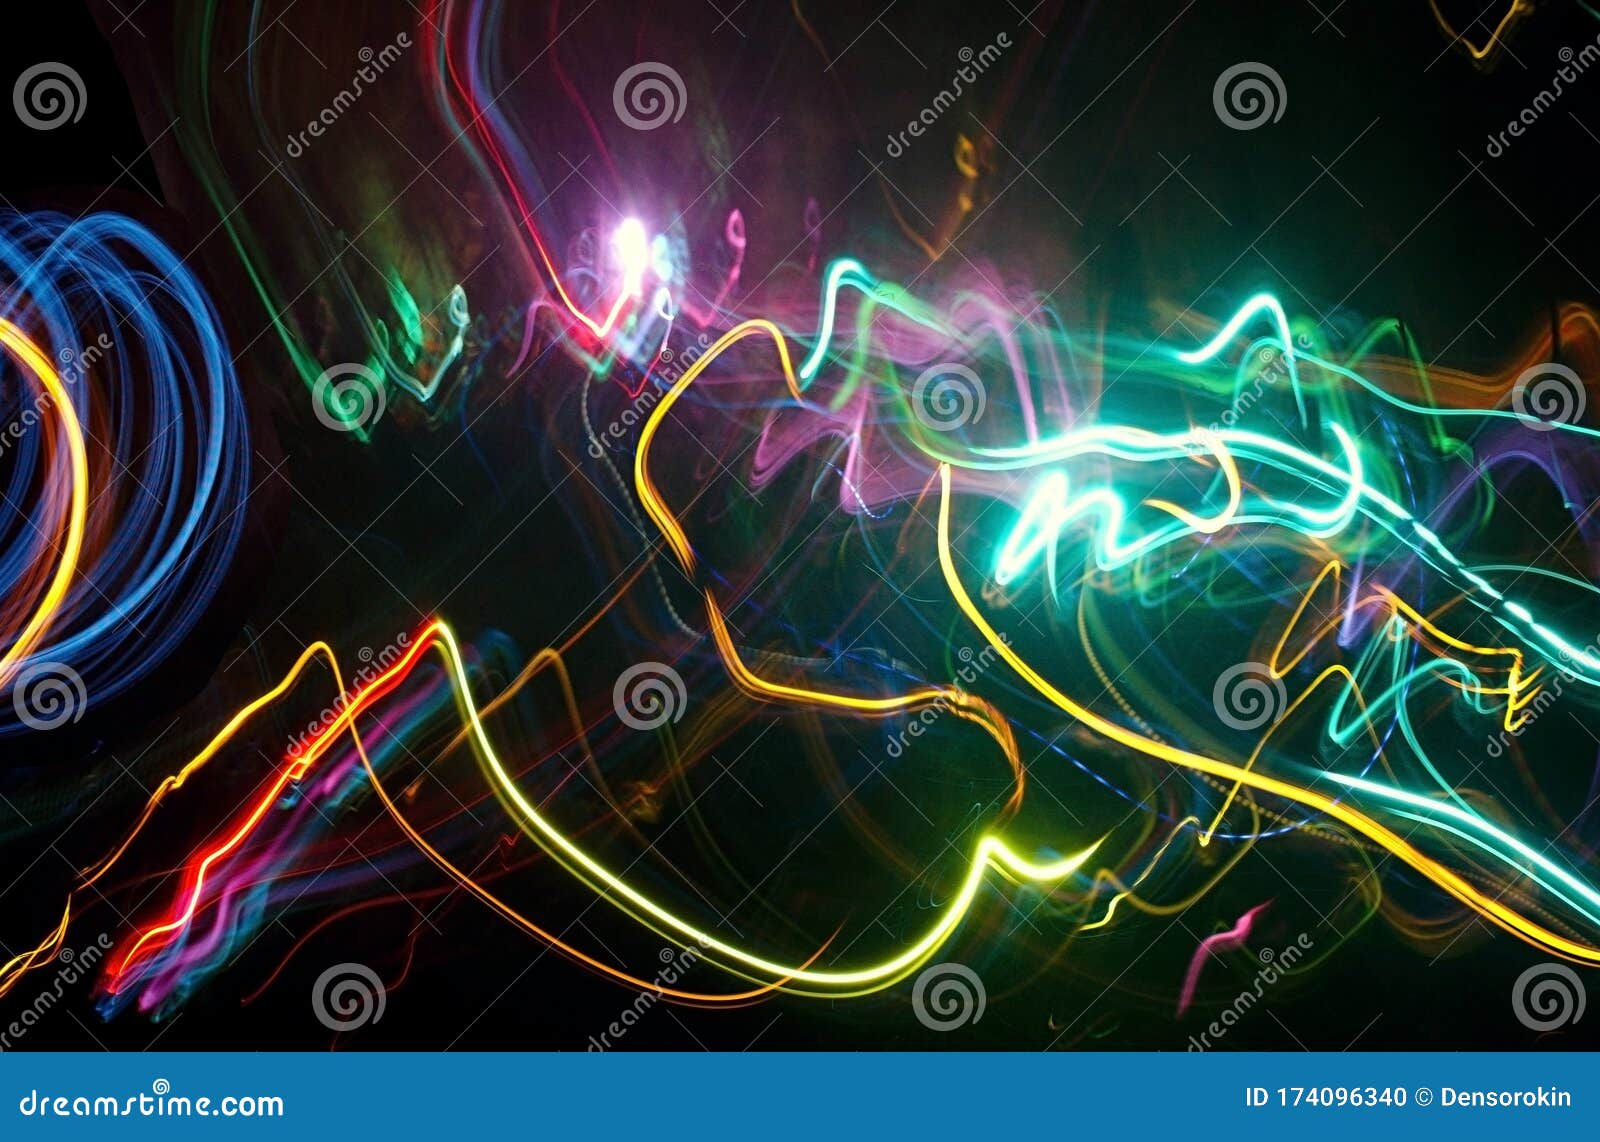 Long Exposure Light Painting Photography of Abstract Colourful Light  Element. Pattern, Texture, Decoration, Wallpaper. Stock Photo - Image of  curl, motion: 174096340